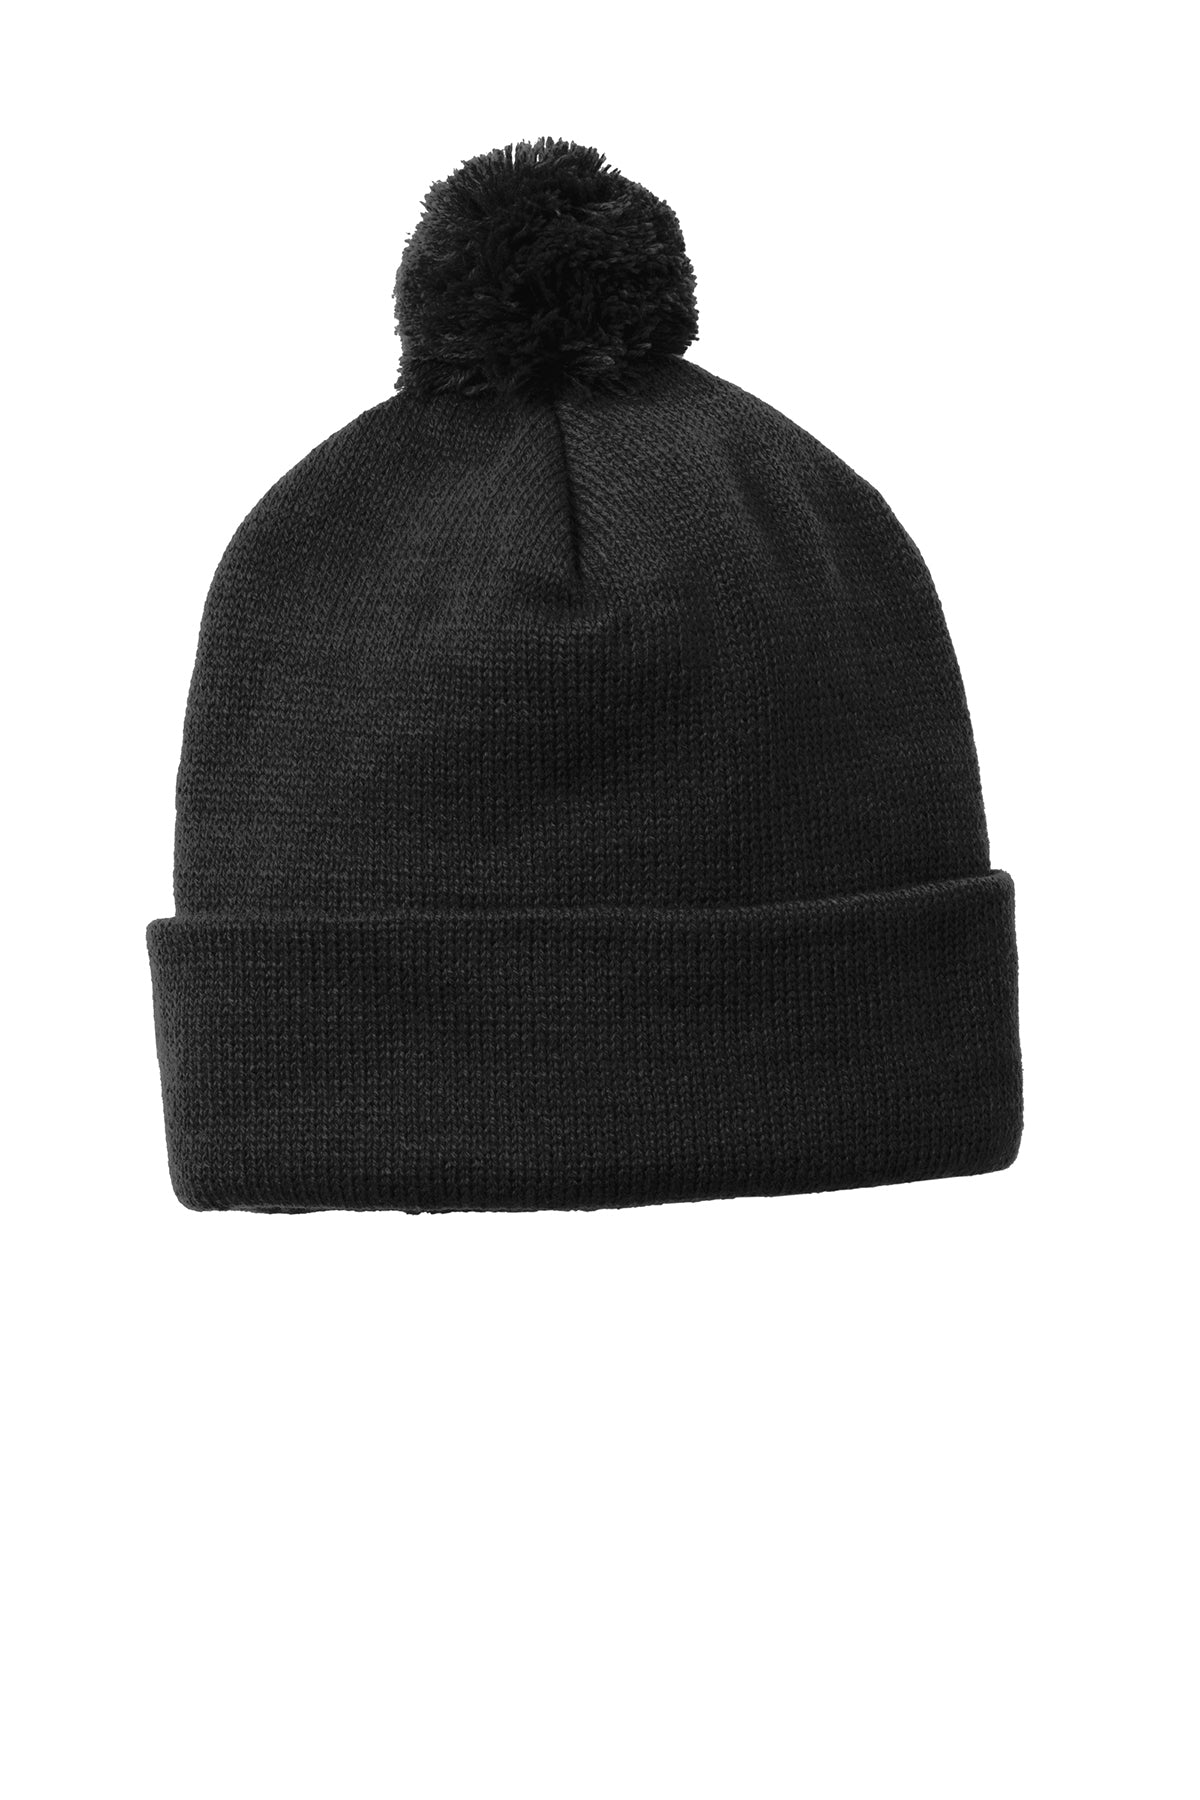 Knit Cap Beanie with Solid Pom Pom - Add Your Full Color Vinyl Logo At No Additional Cost